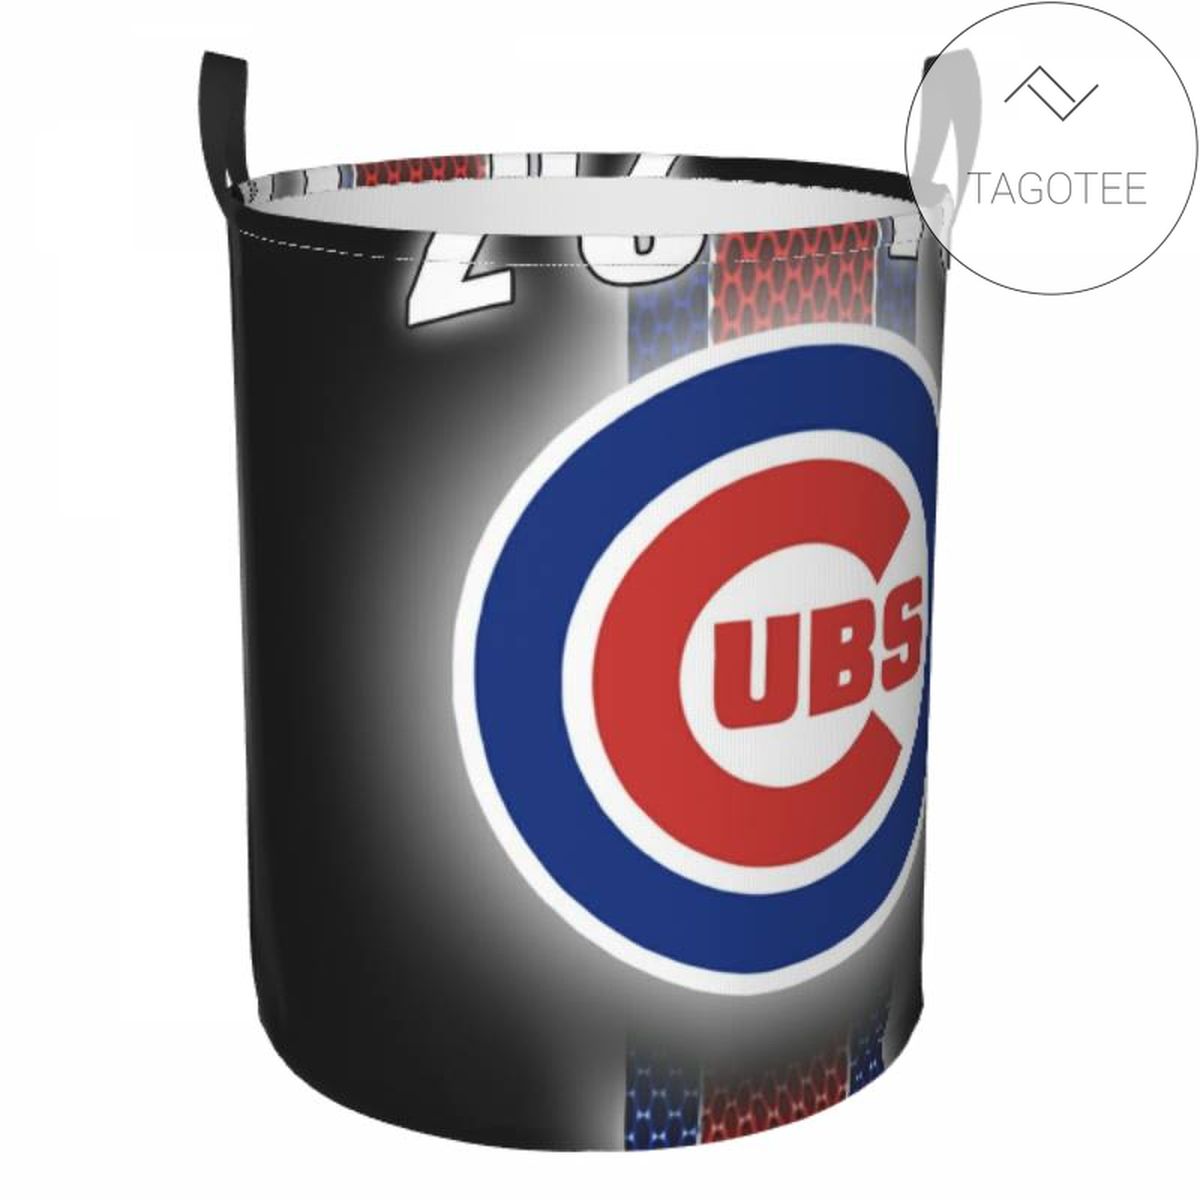 Mlb Chicago Cubs Clothes Basket Target Laundry Bag Type #092300